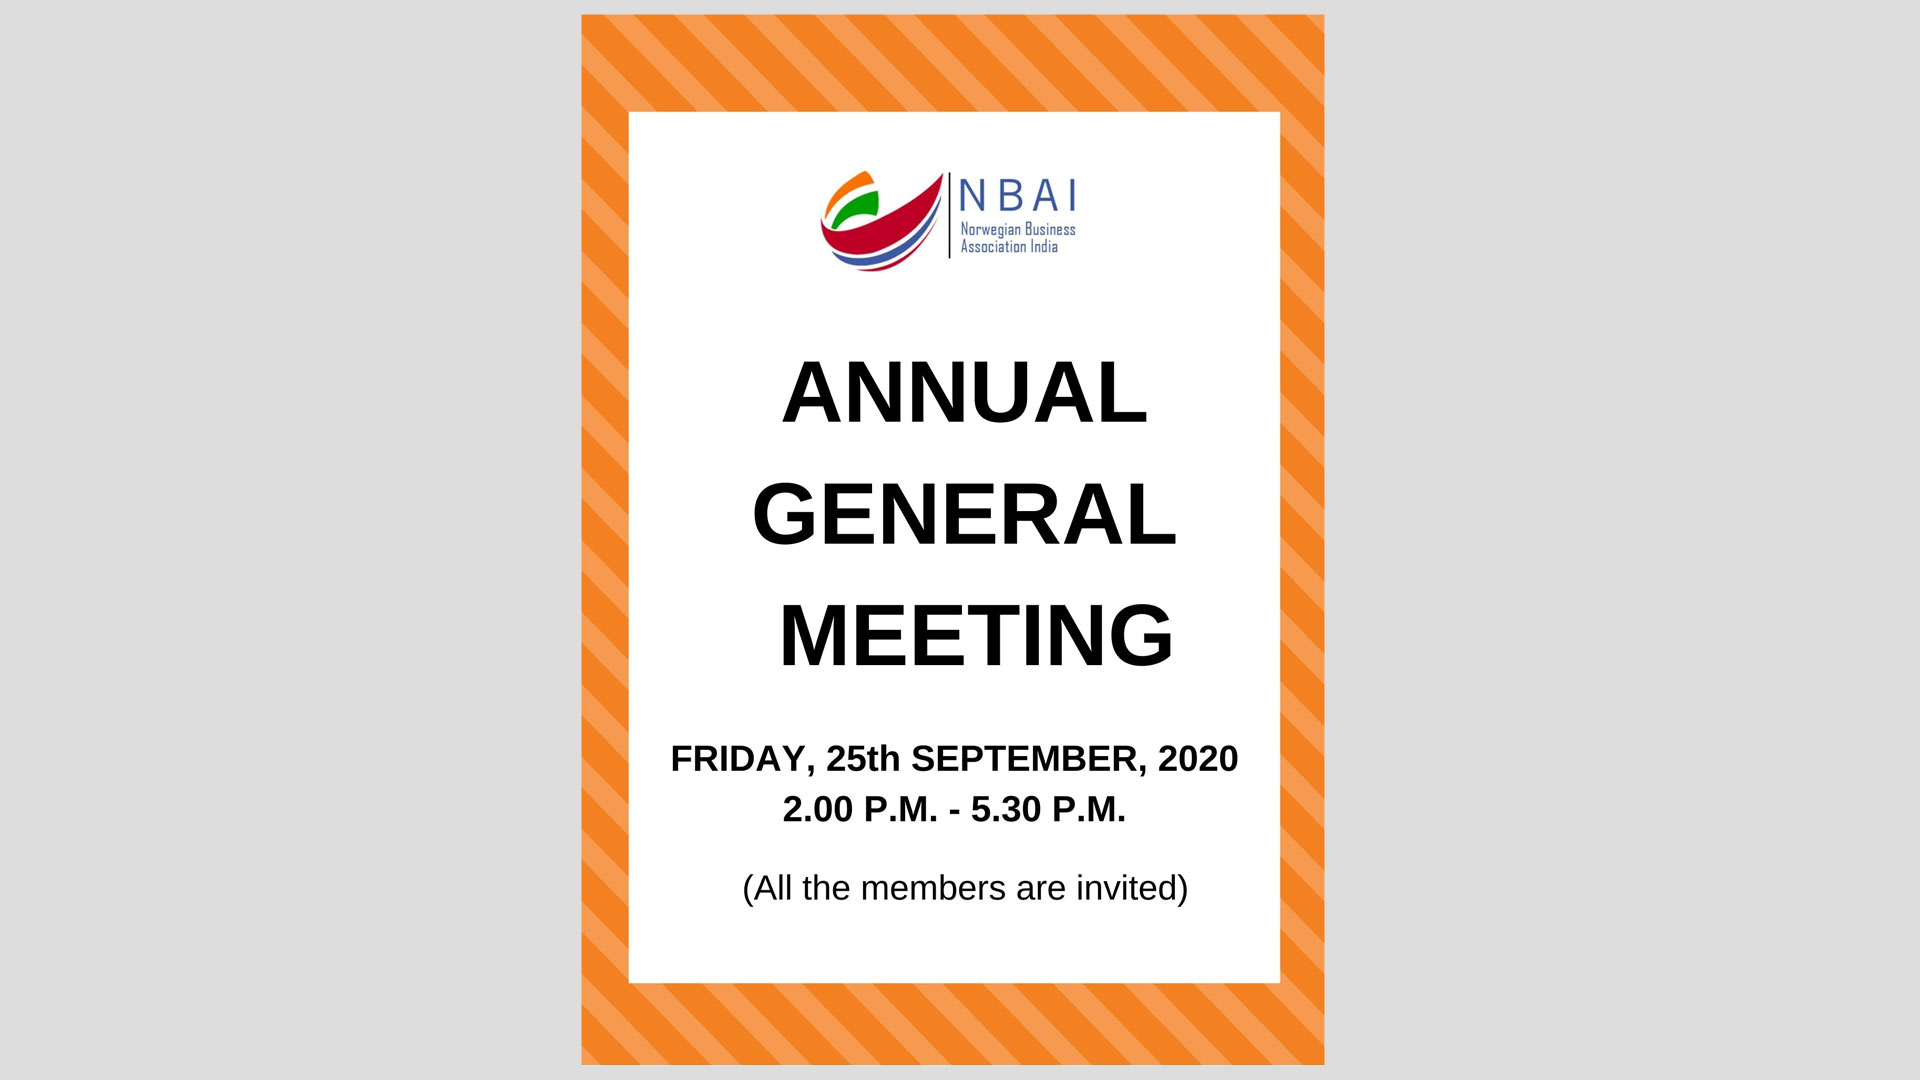 NORWEGIAN BUSINESS ASSOCIATION INDIA (NBAI) INVITES THE MEMBERS FOR THE ANNUAL GENERAL MEETING.